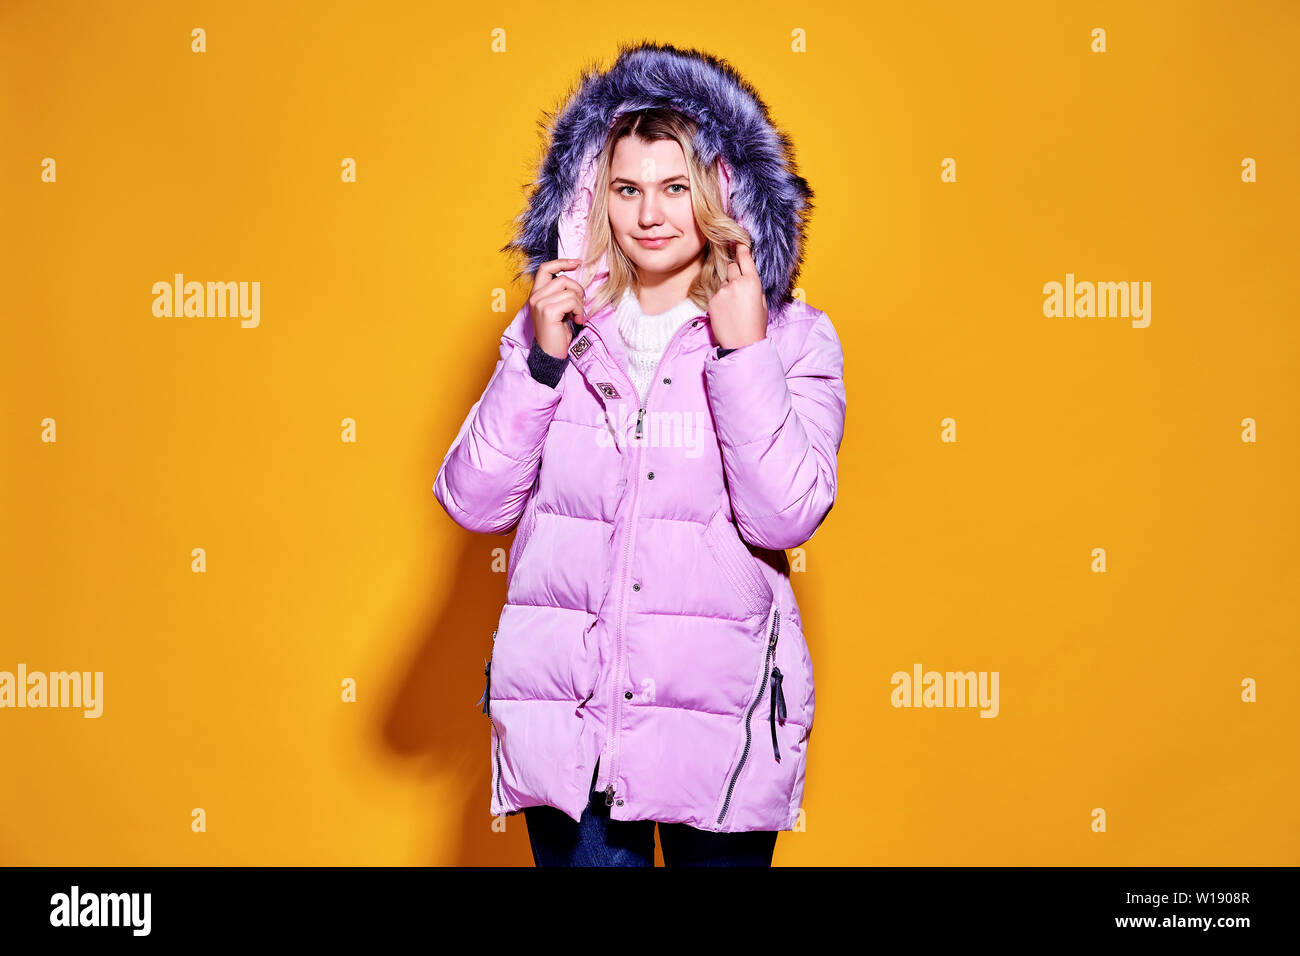 Young fashion woman in short violet down jacket. Stock Photo